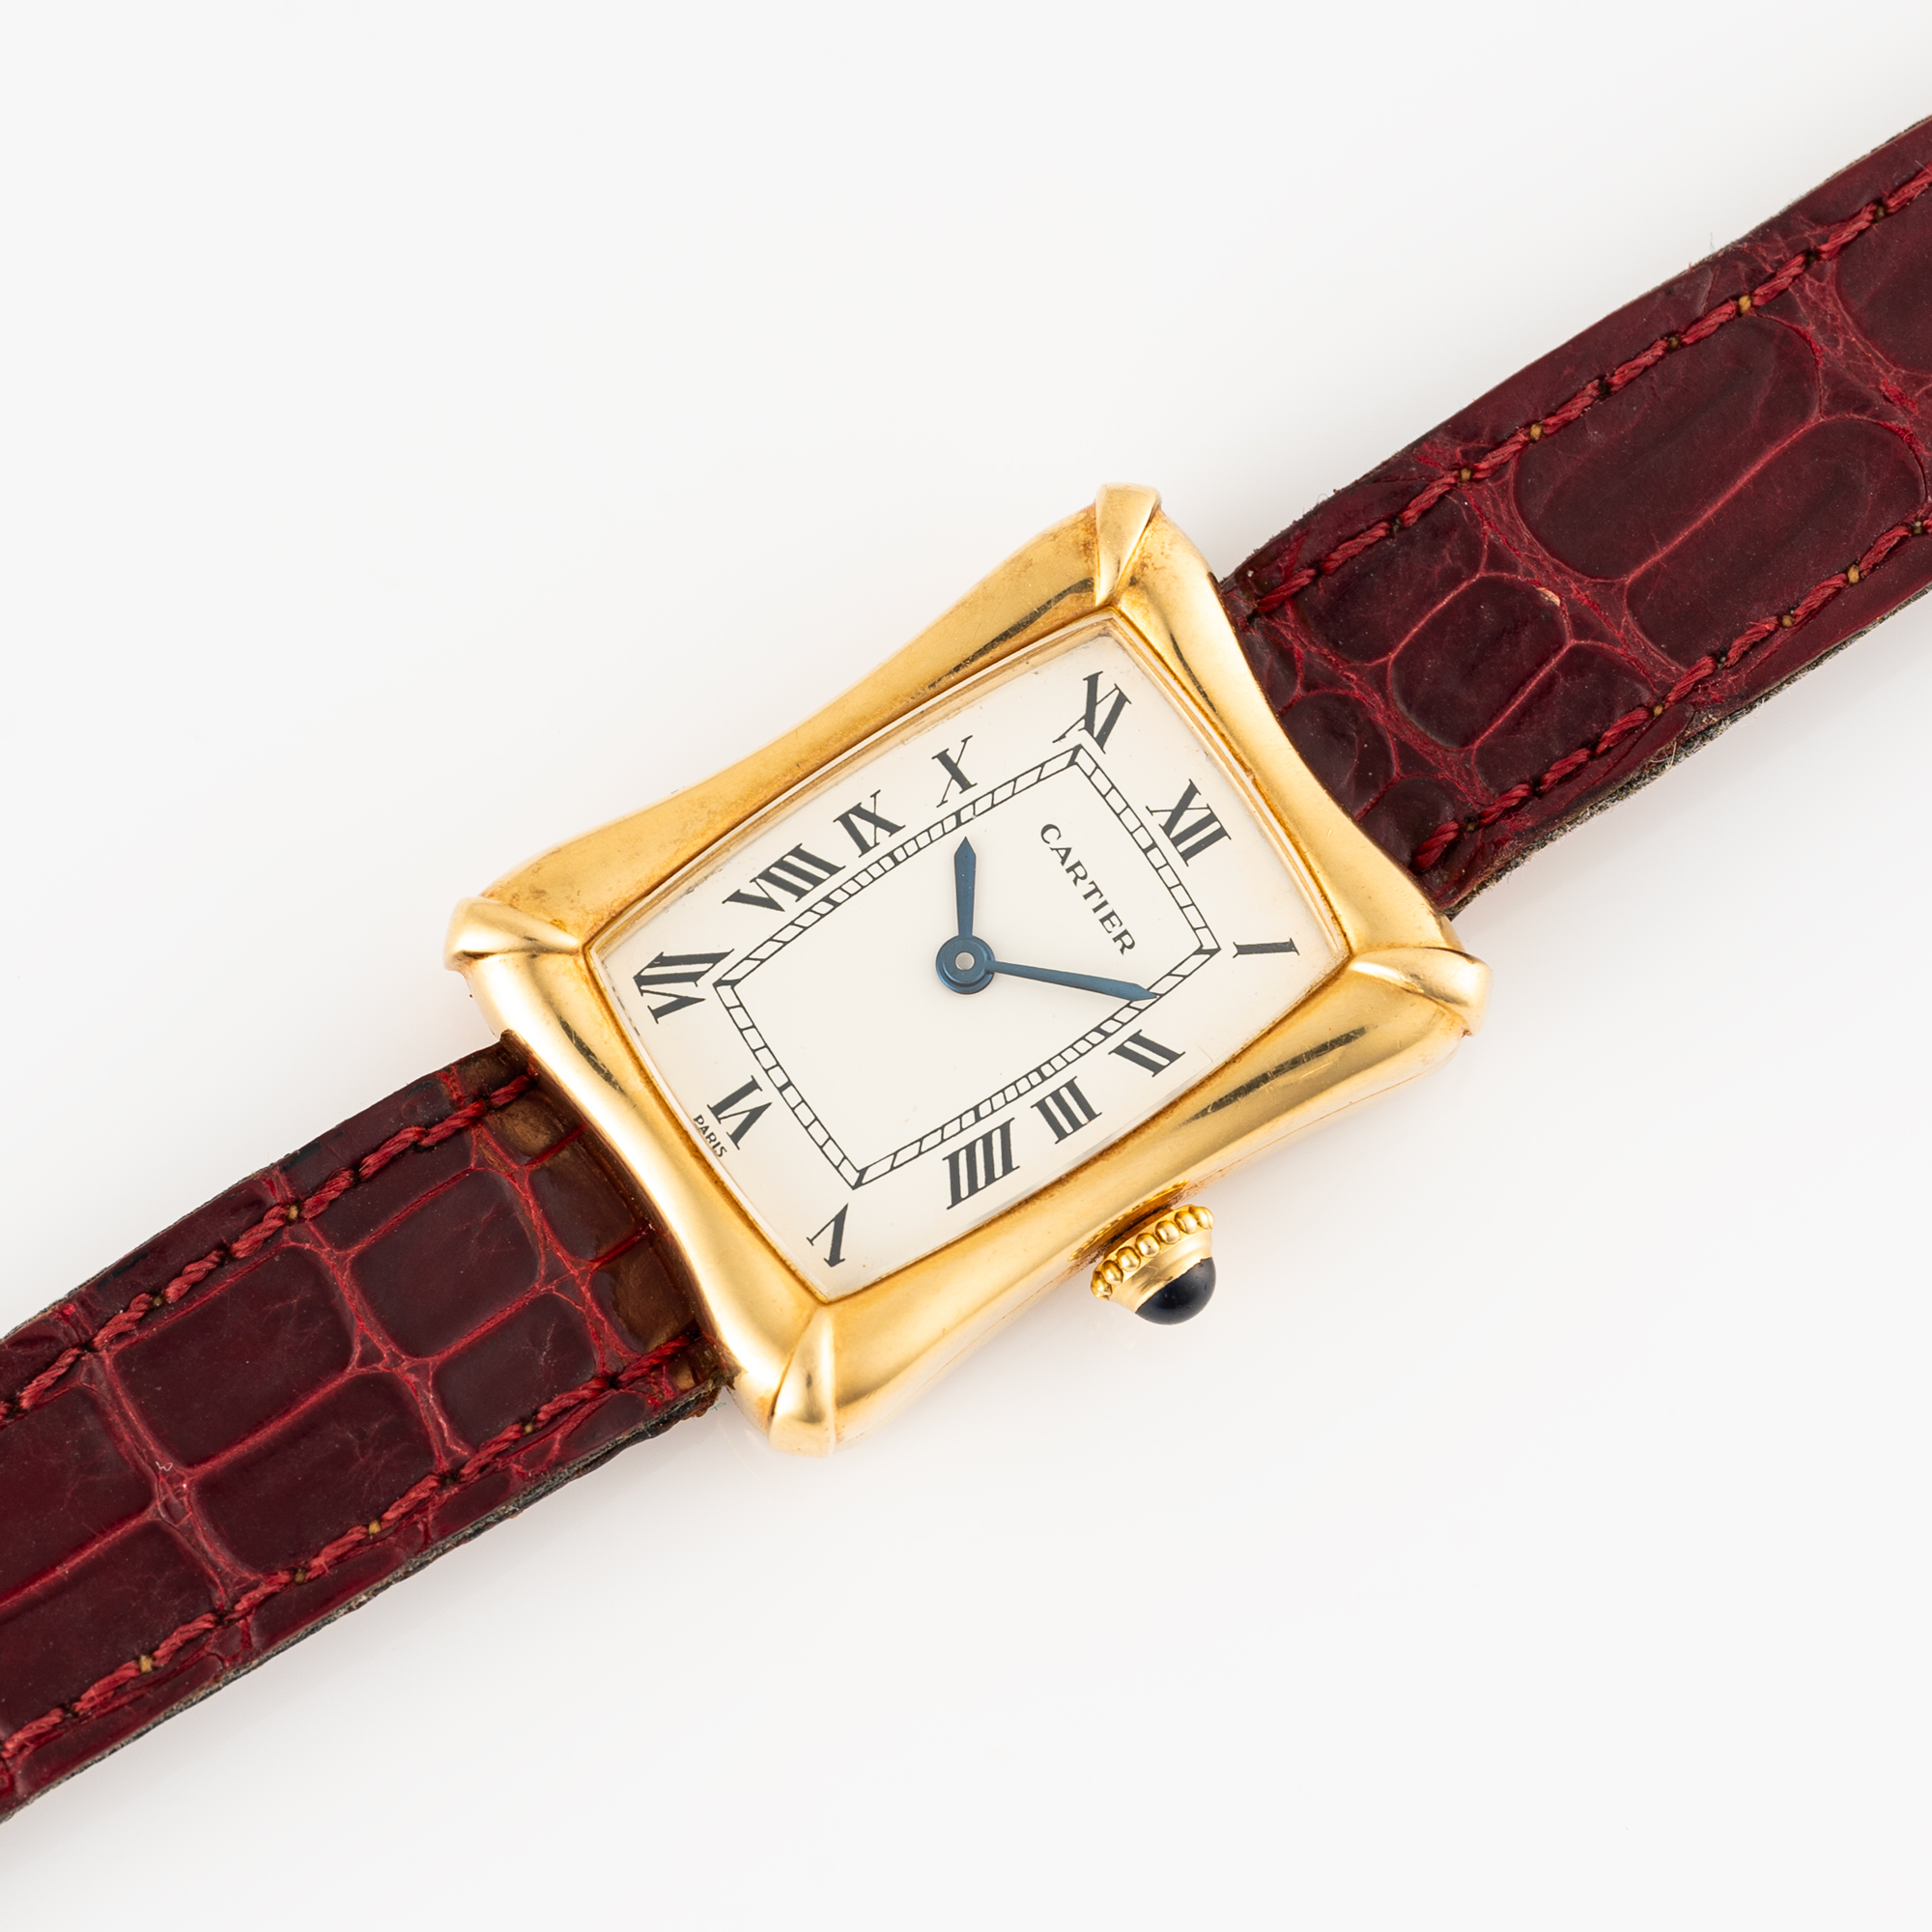 A VERY RARE LADY'S 18K SOLID GOLD CARTIER PARIS BAMBOO COUSSIN WRIST WATCH CIRCA 1970s, REF. 78110 - Image 4 of 10